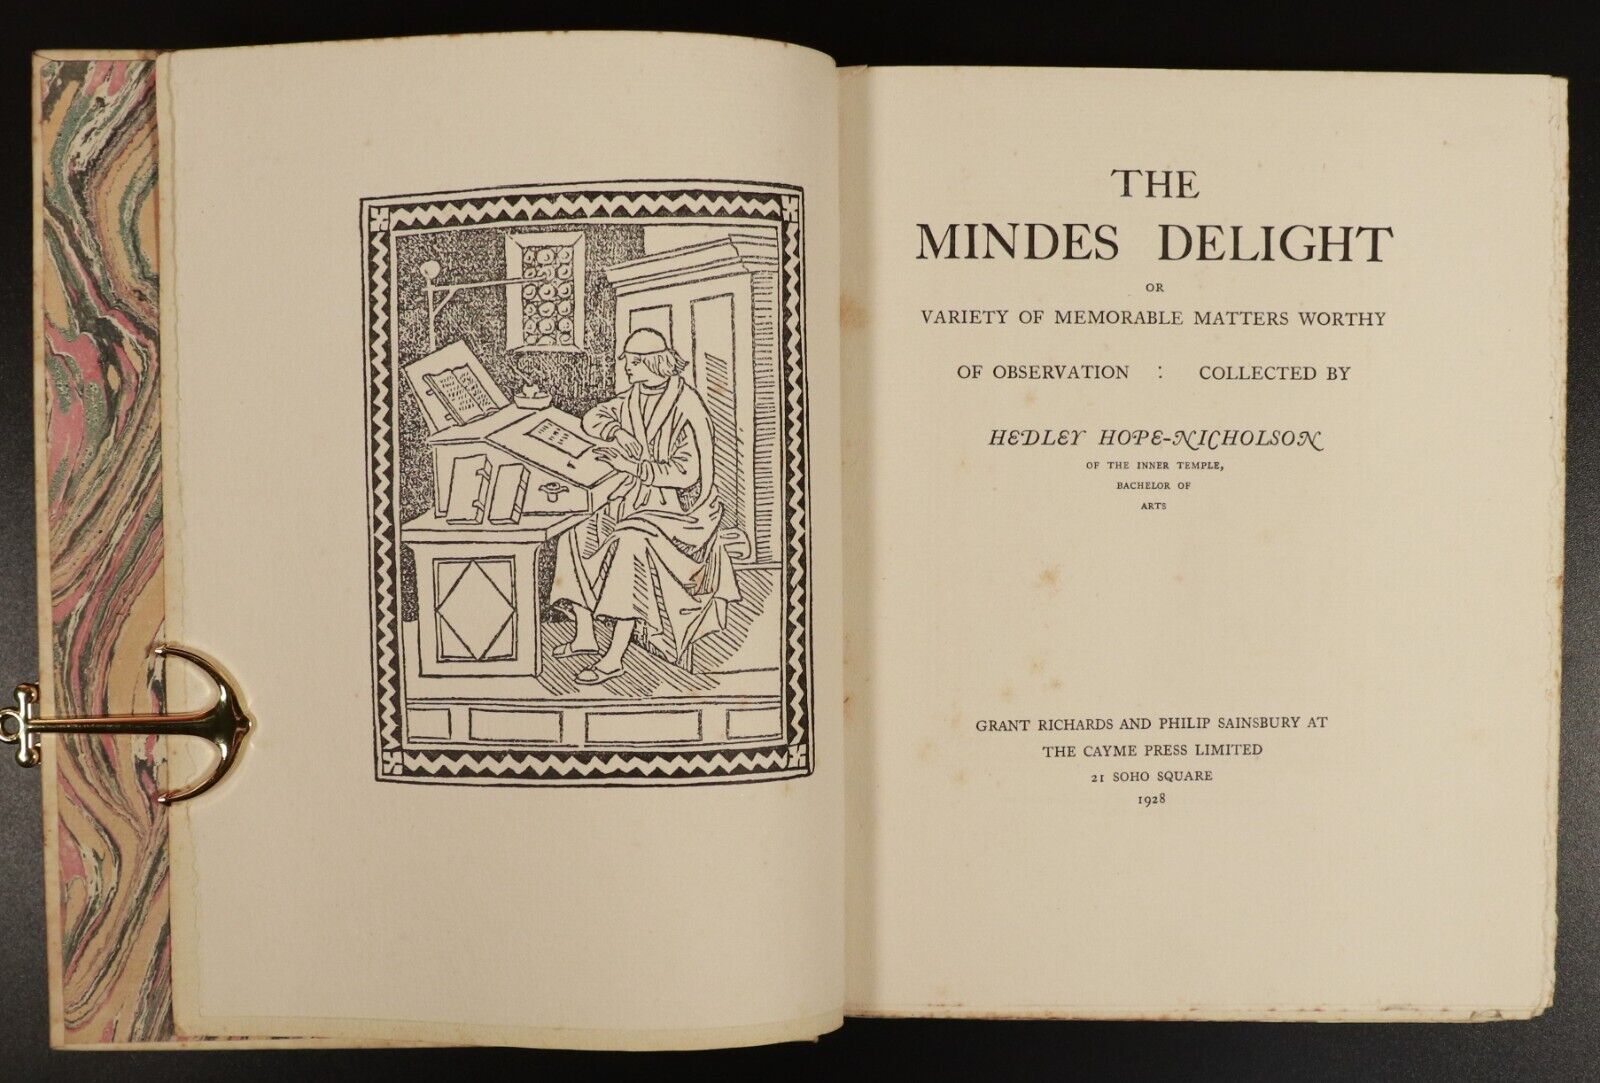 1928 The Mindes Delight by Hedley Hope-Nicholson Antique British Literature Book - 0